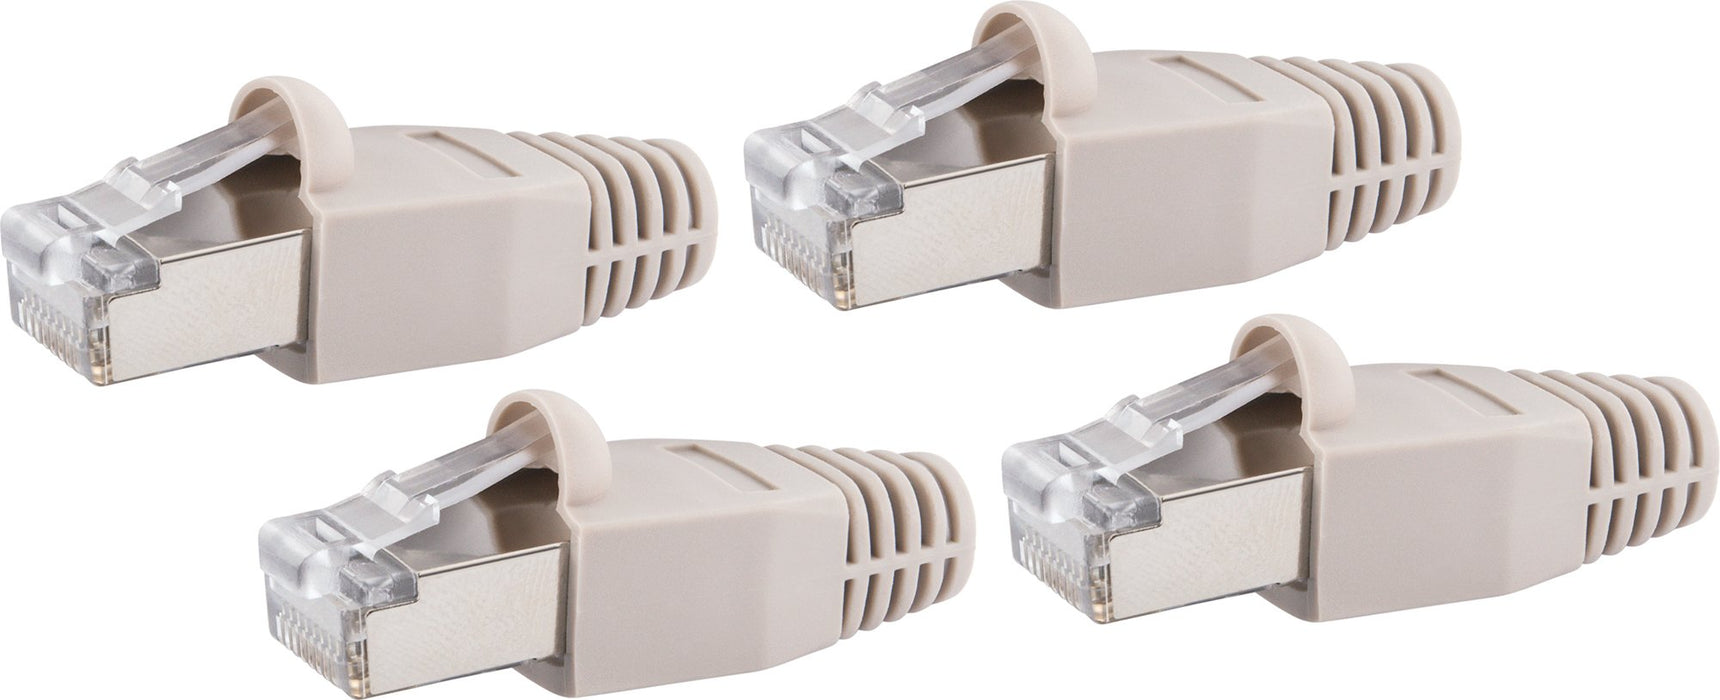 CAT 6 network connector